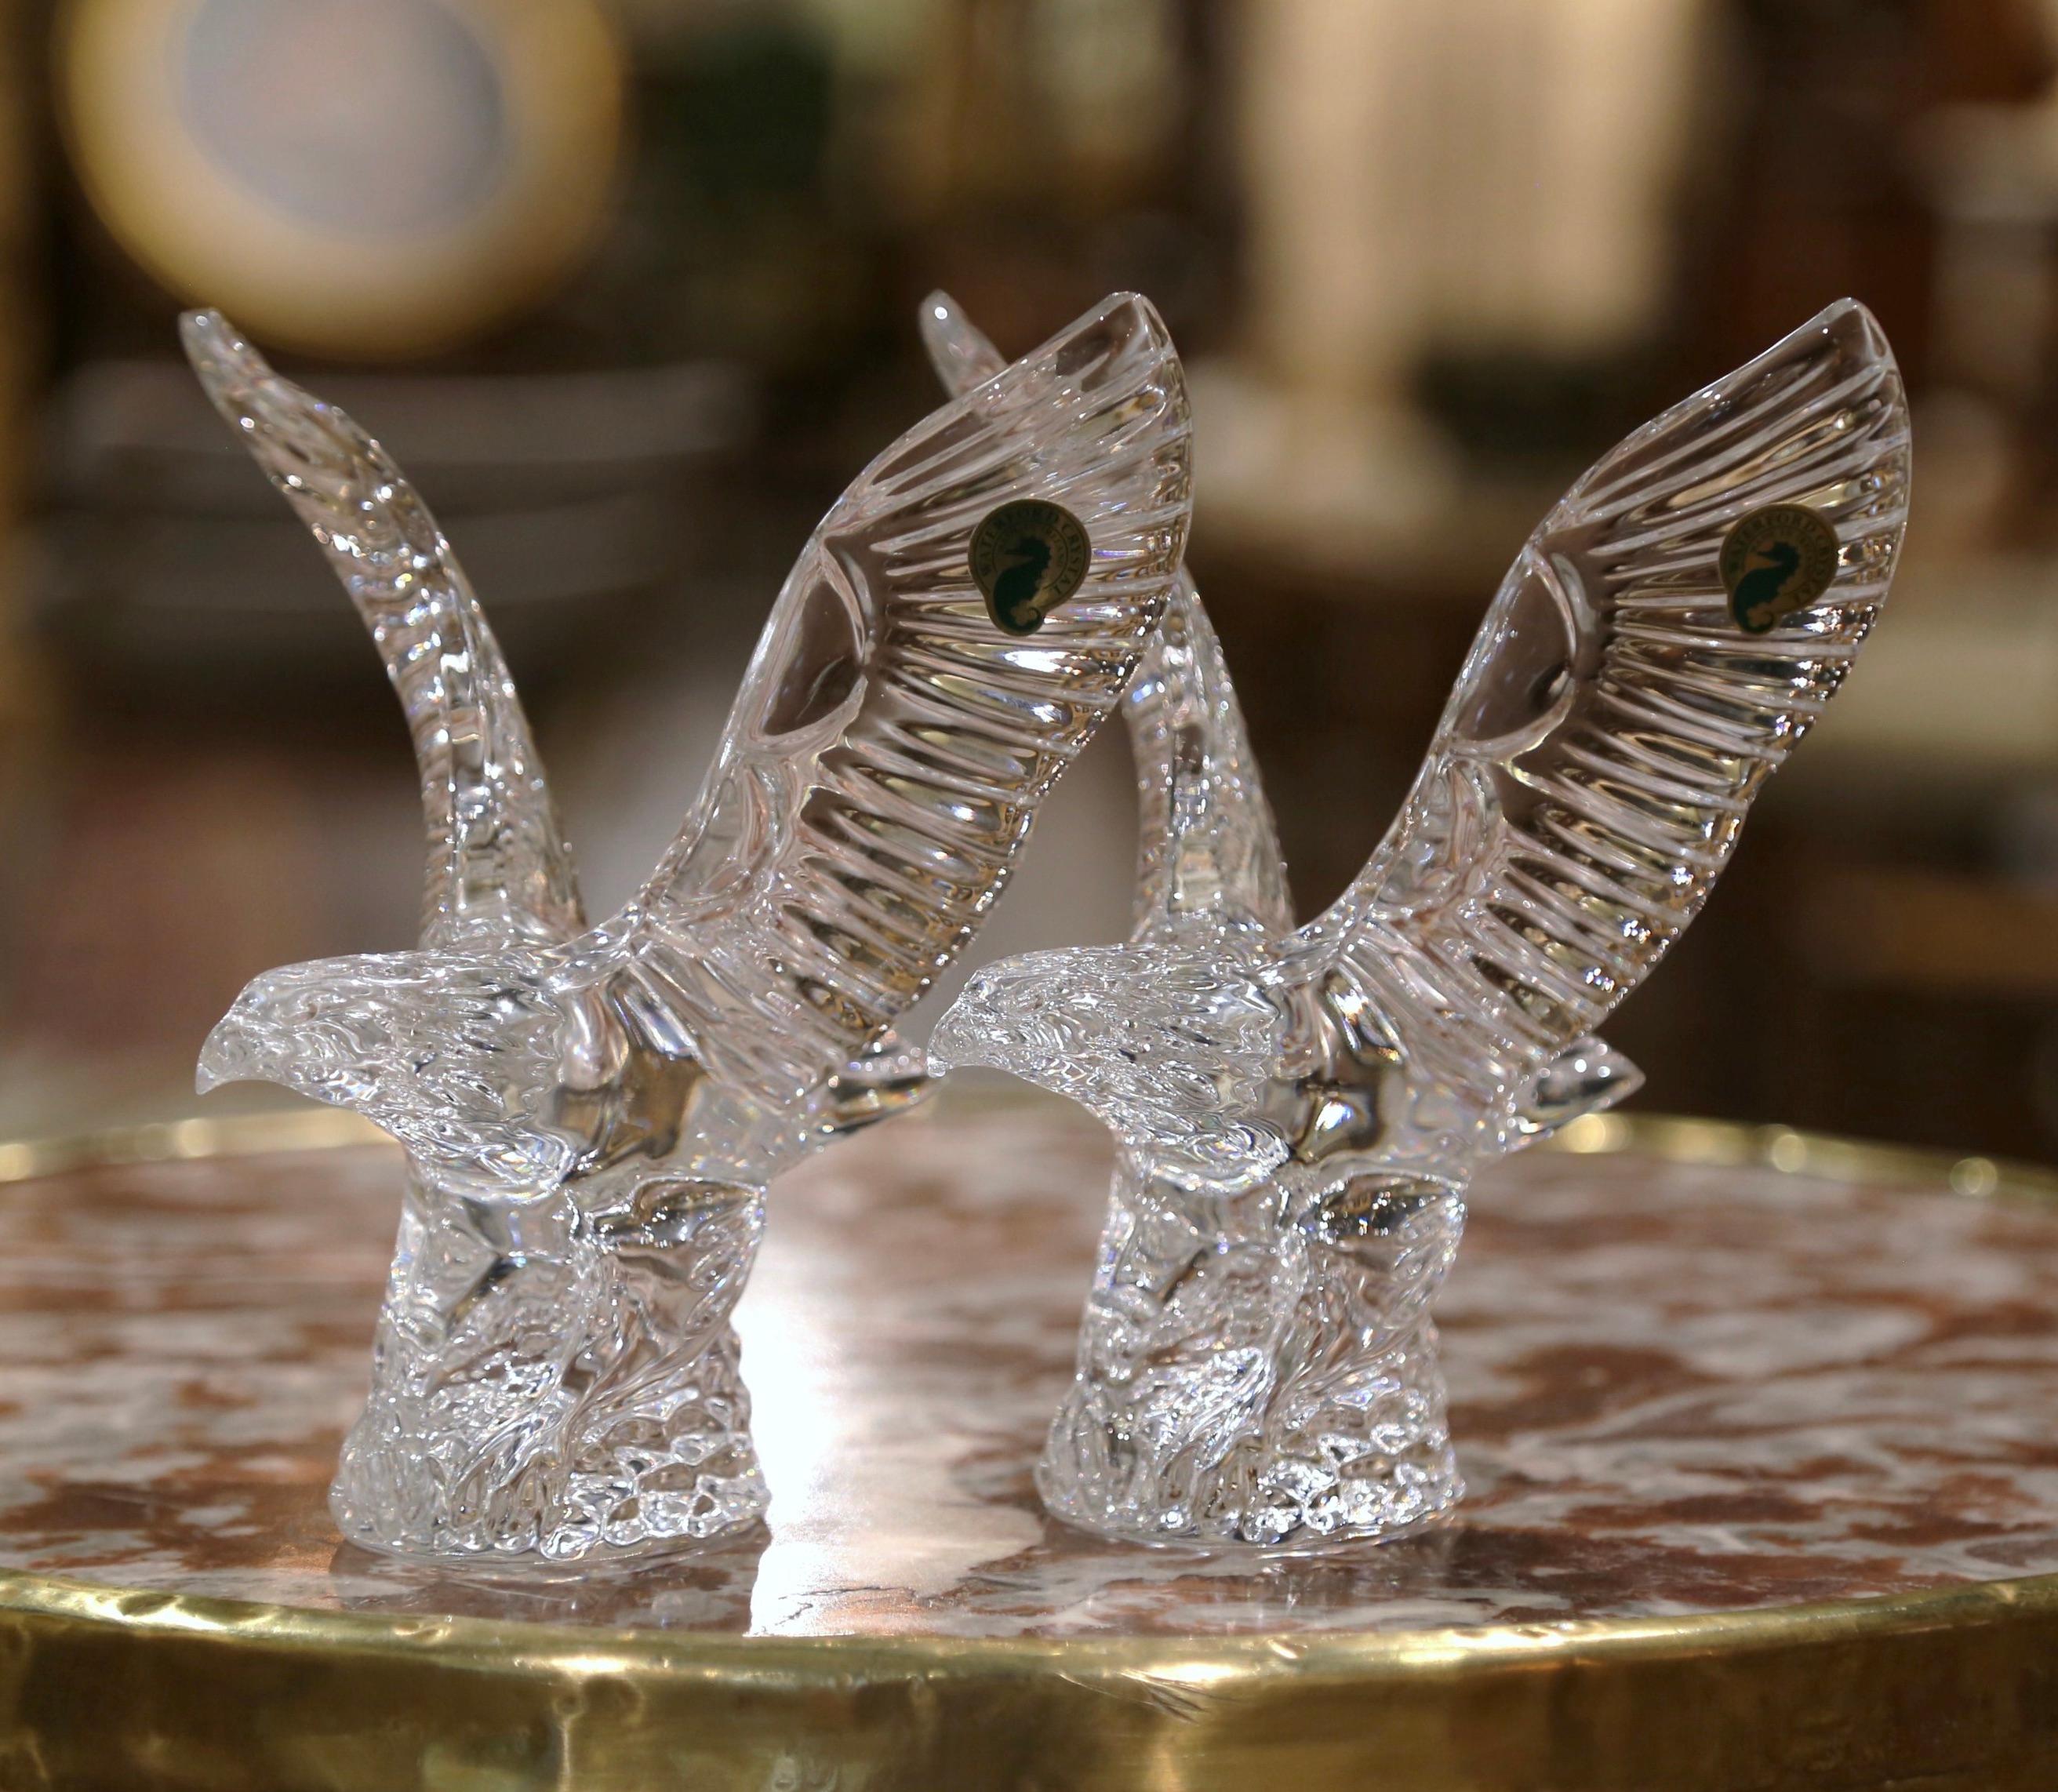 This set of intricately detailed flying bald eagles captured in clear and frosted crystal by Waterford were hand made in Ireland circa 1980. Each identical figurine features an elegant bird of prey with its wings stretched high and wide and its head